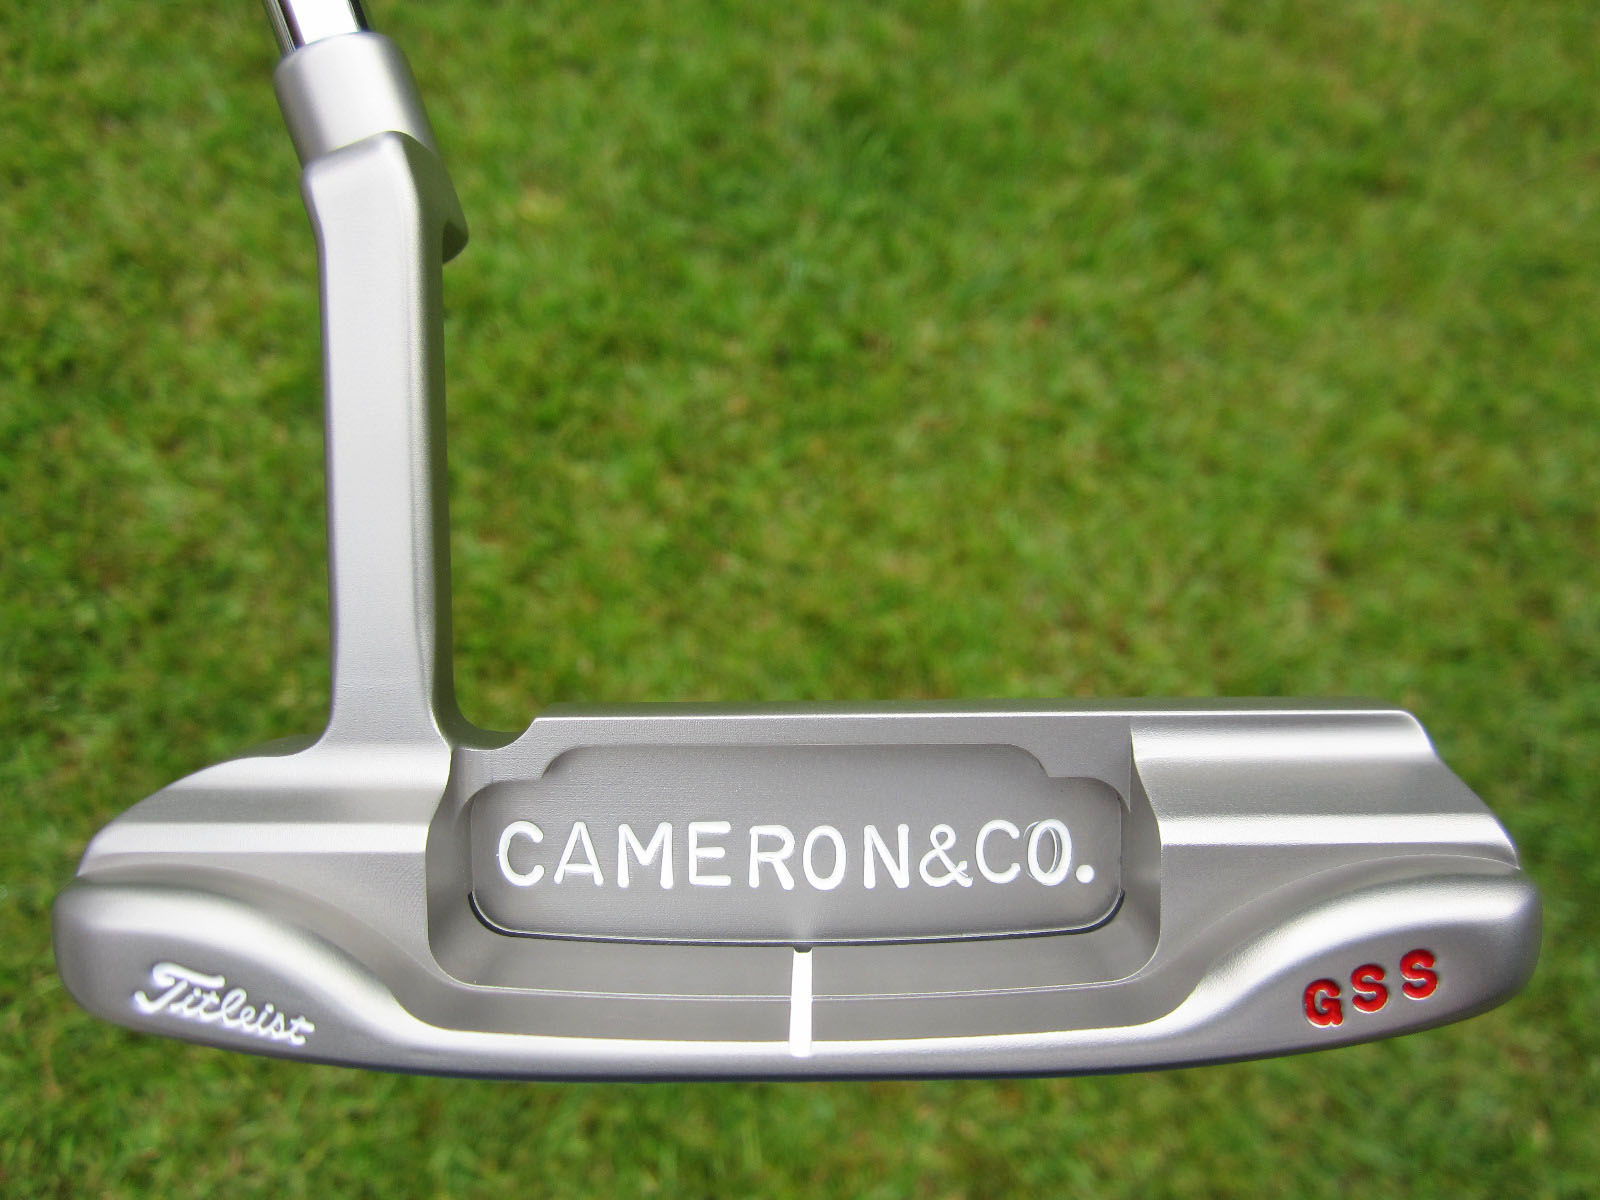 Scotty Cameron Tour Only GSS Cameron & Co. Newport Beach Circle T 